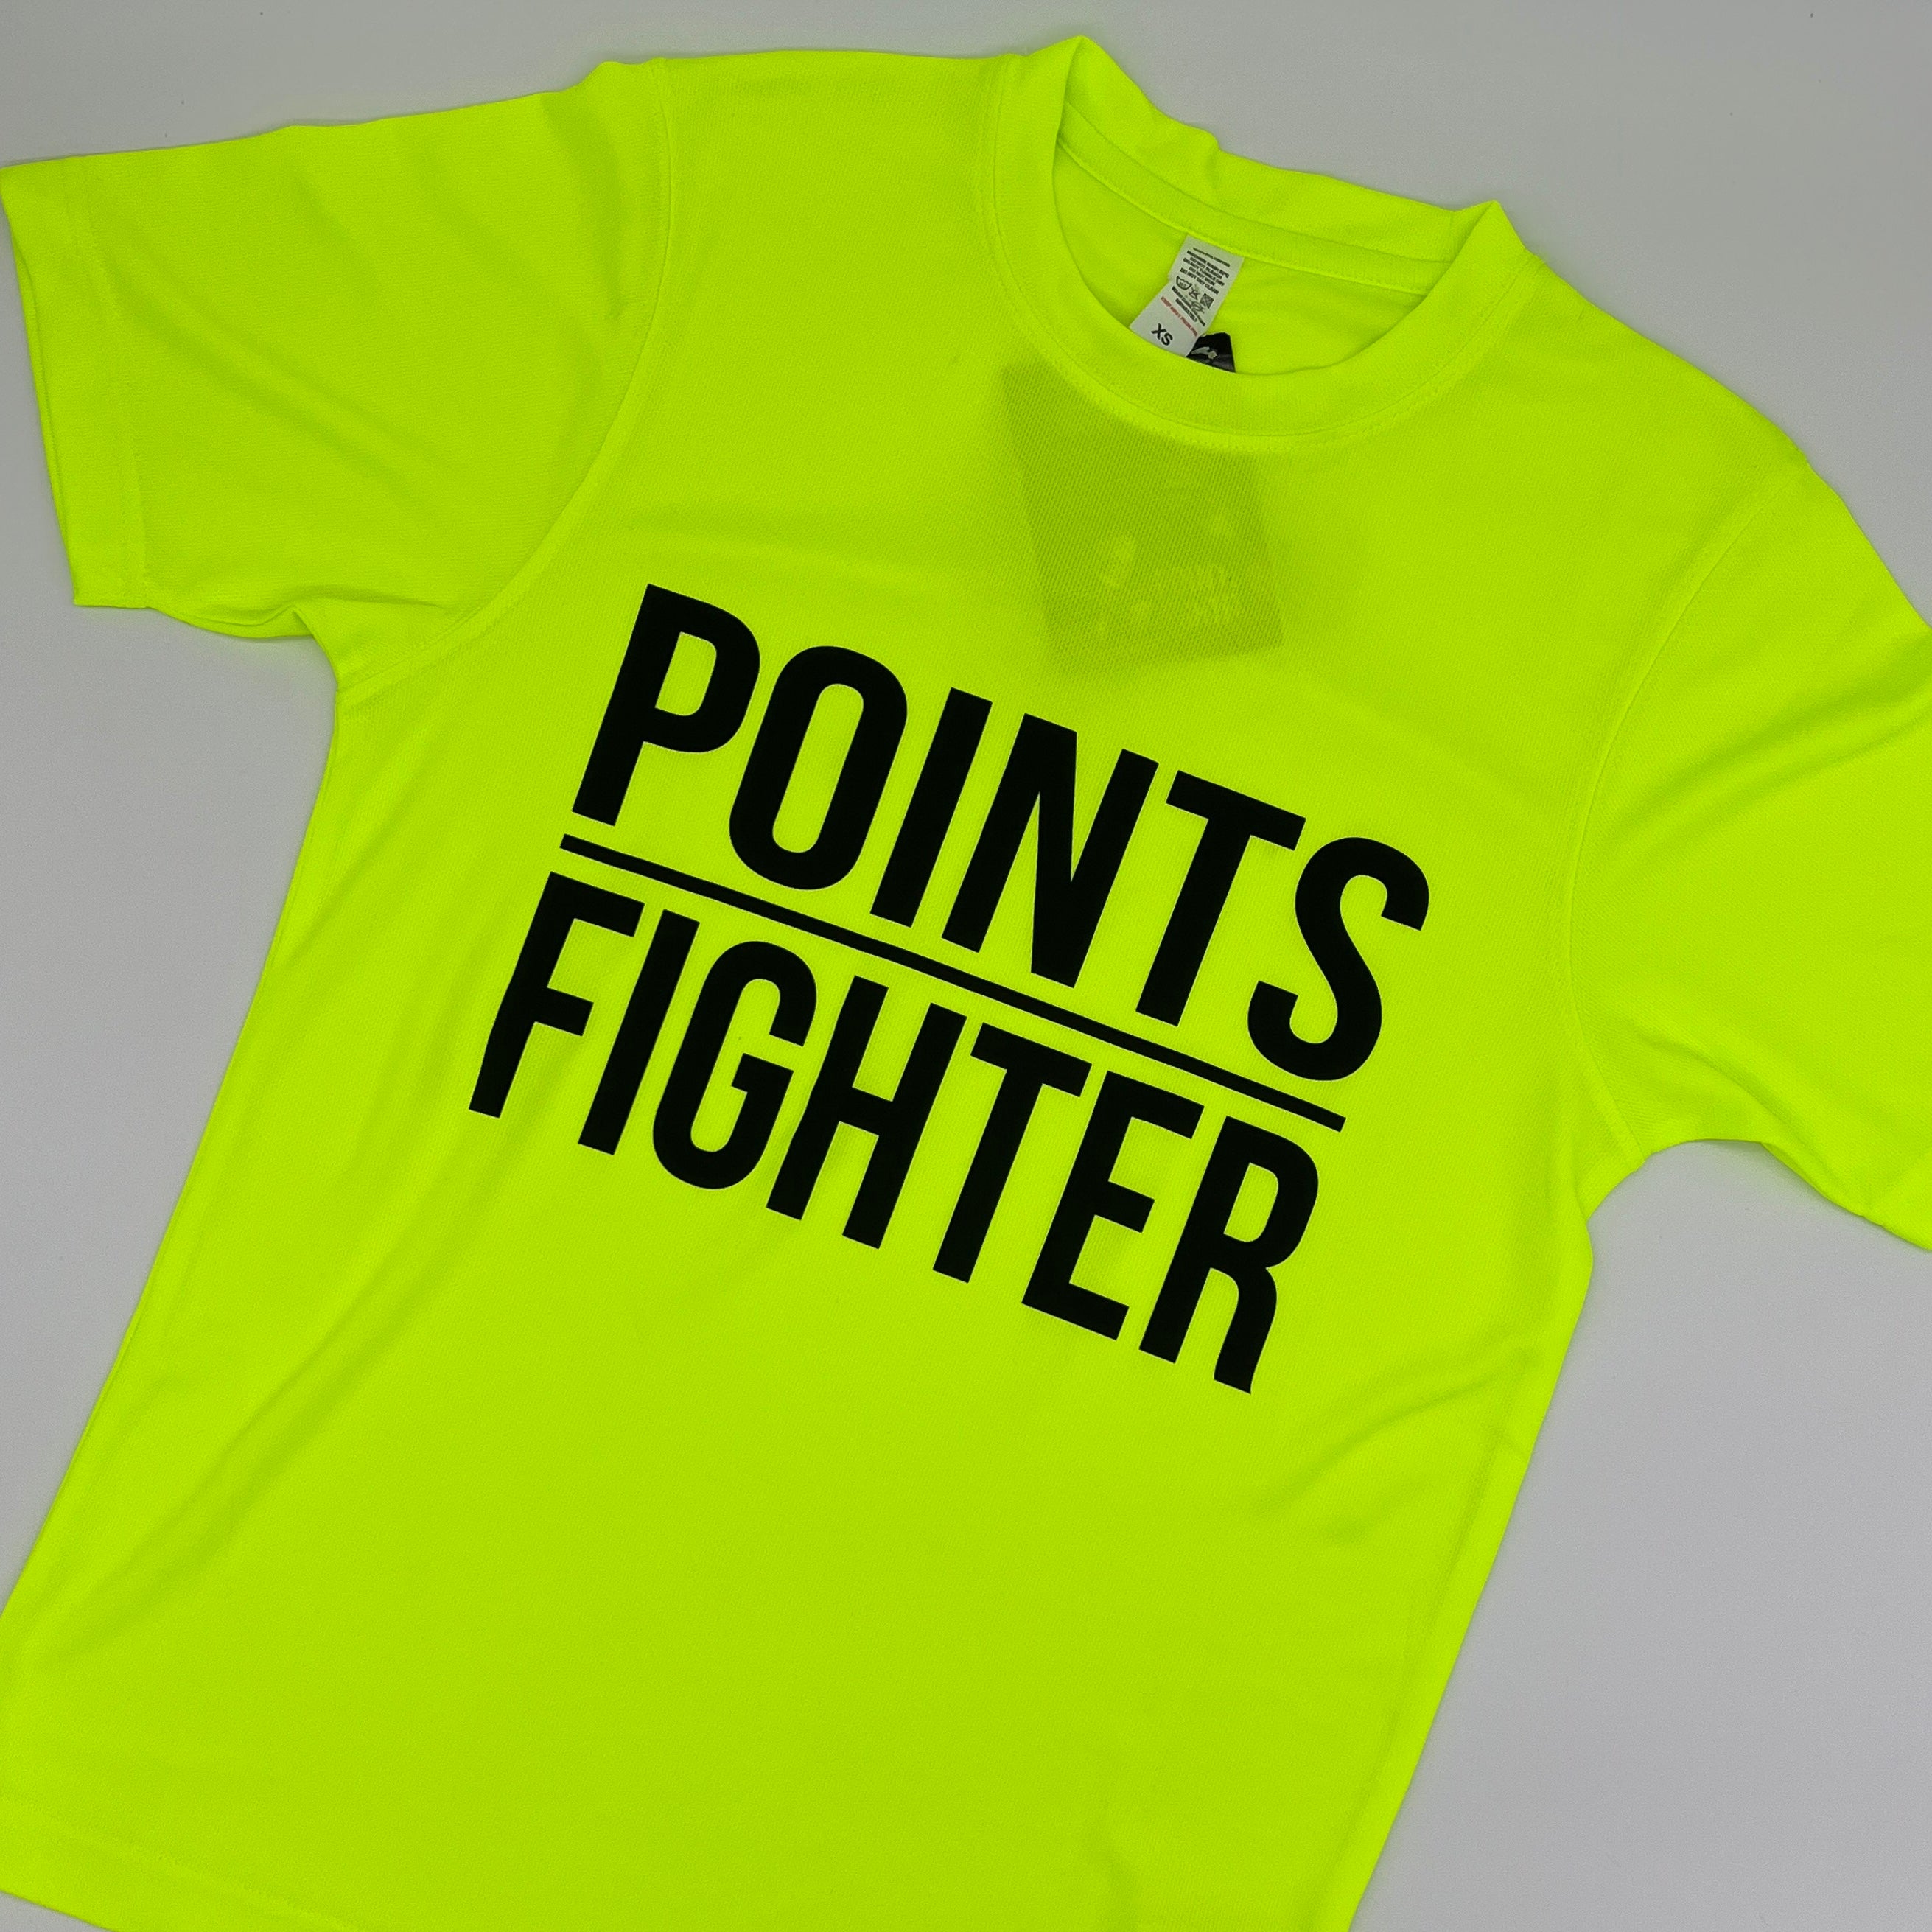 Points Fighter Tech T-Shirt - Neon Yellow